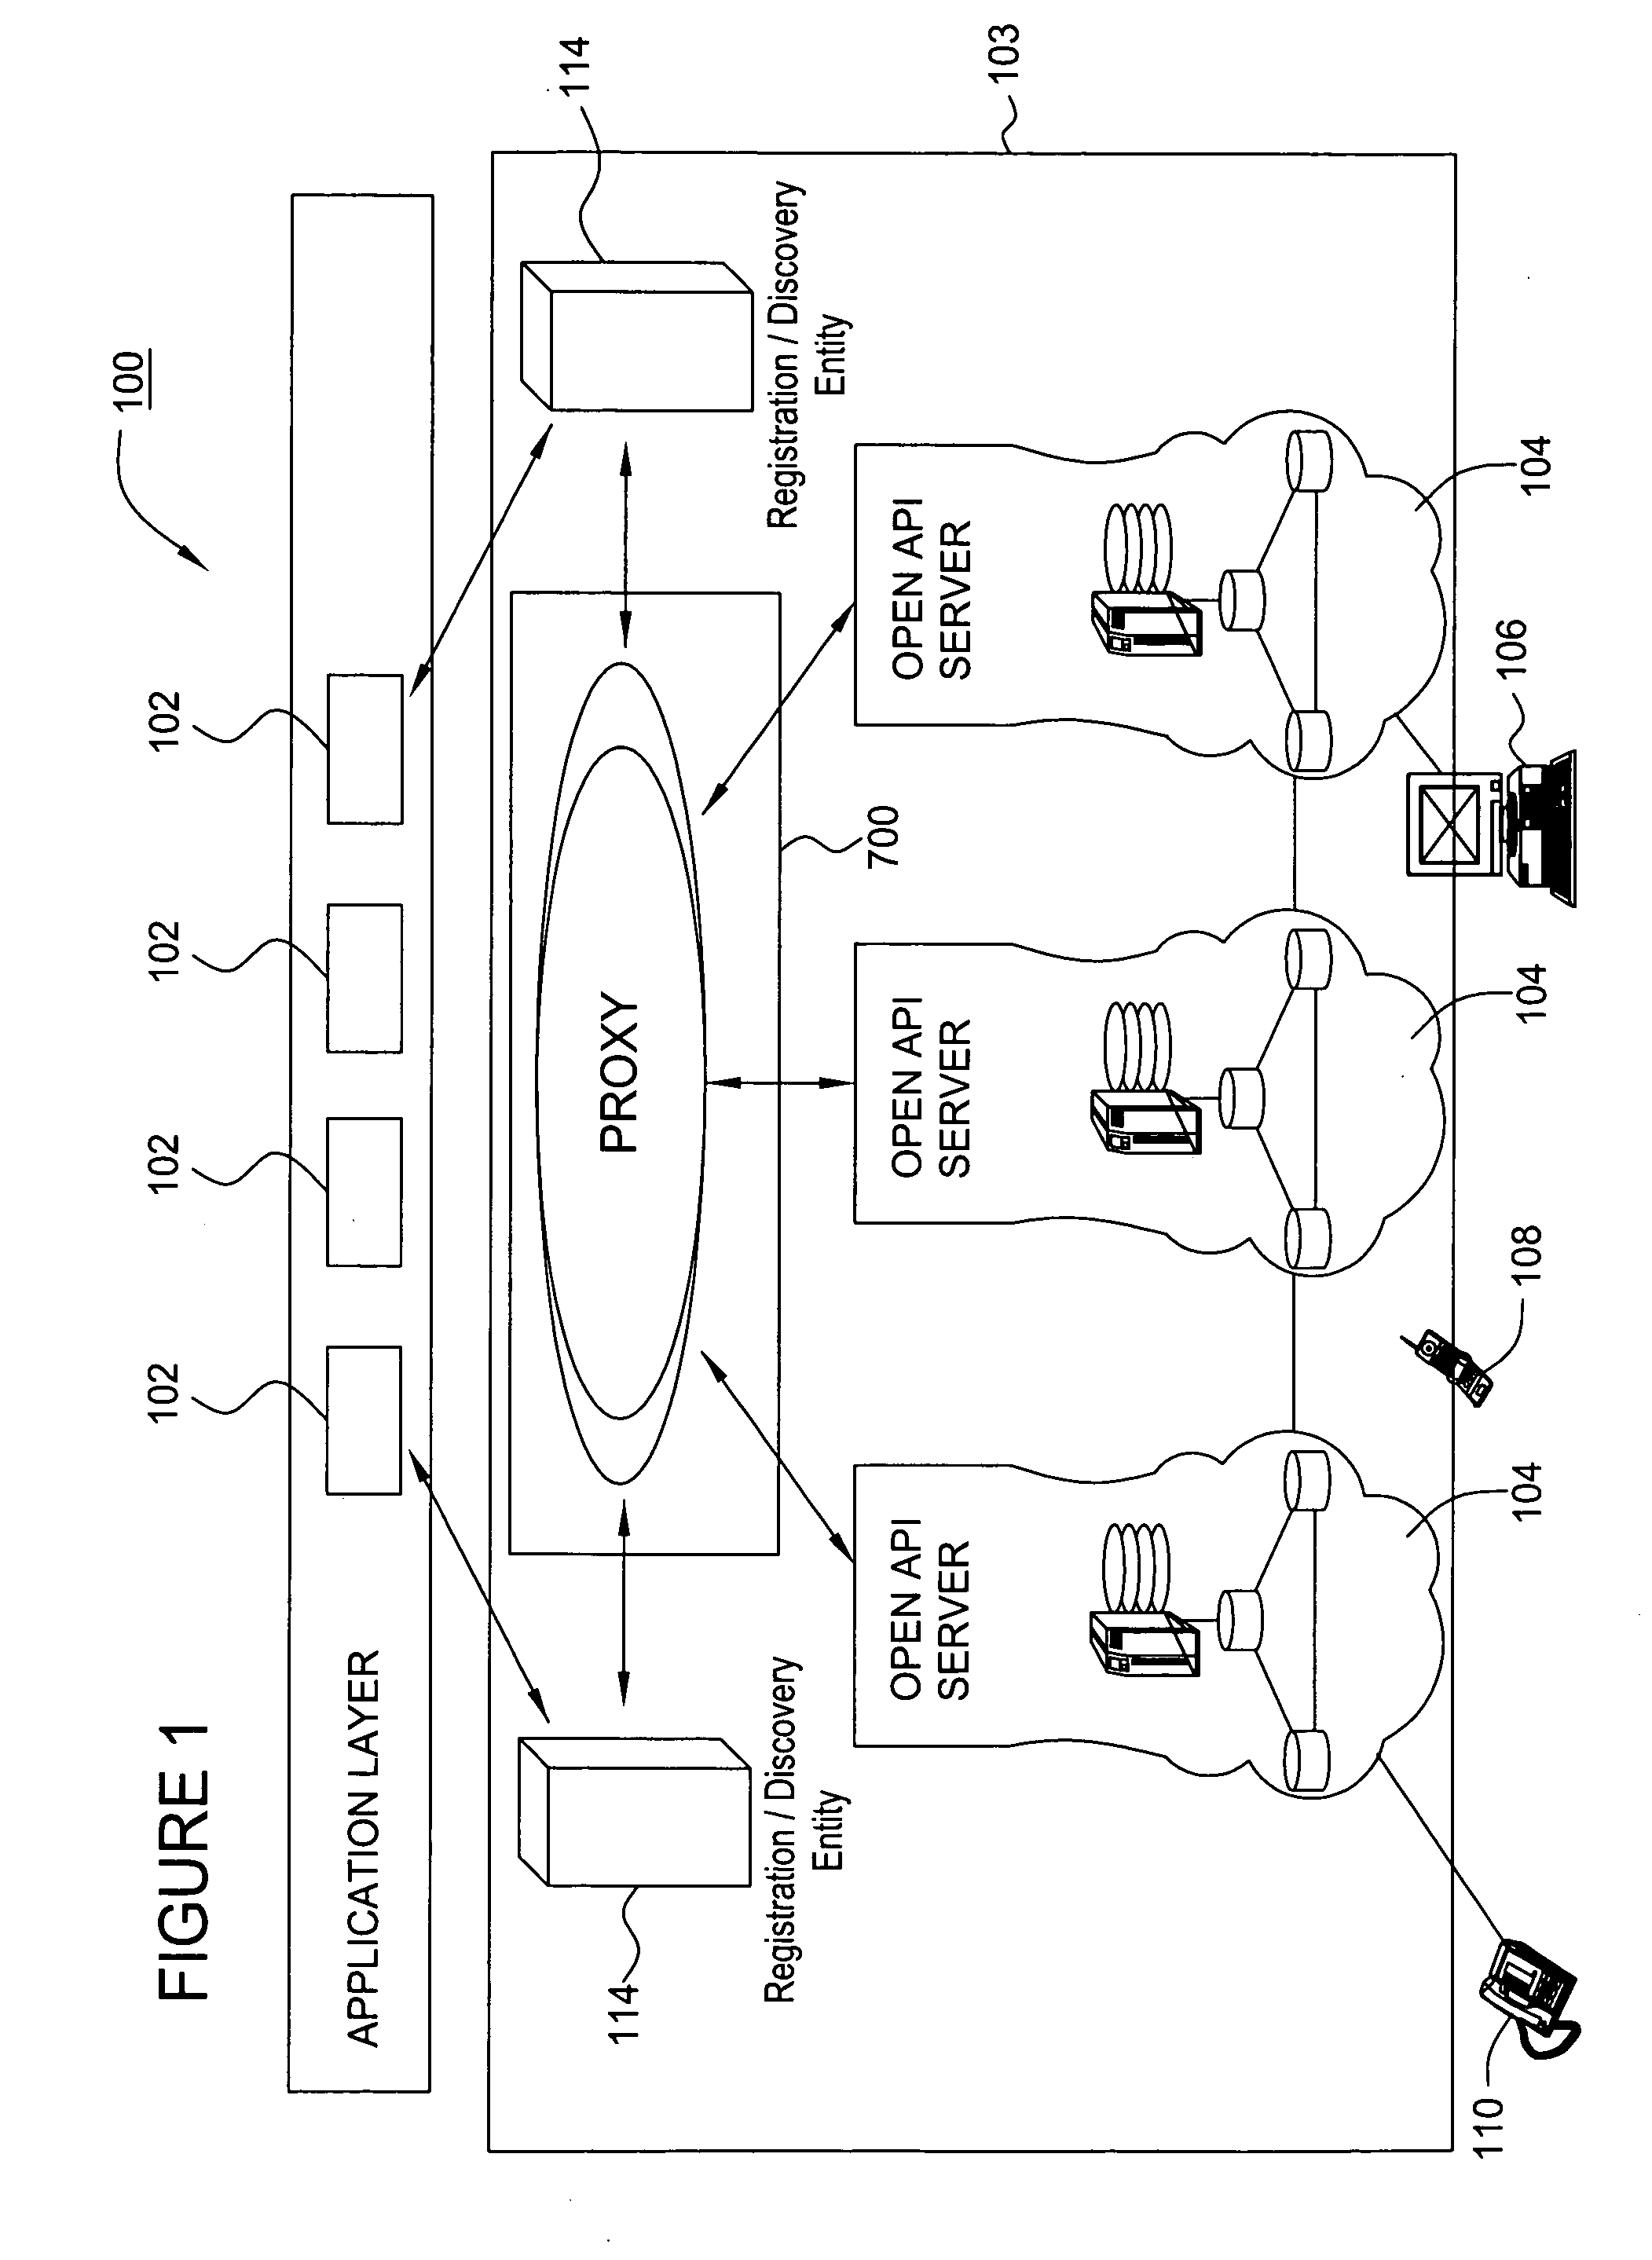 Method and apparatus for operating an open API network having a proxy